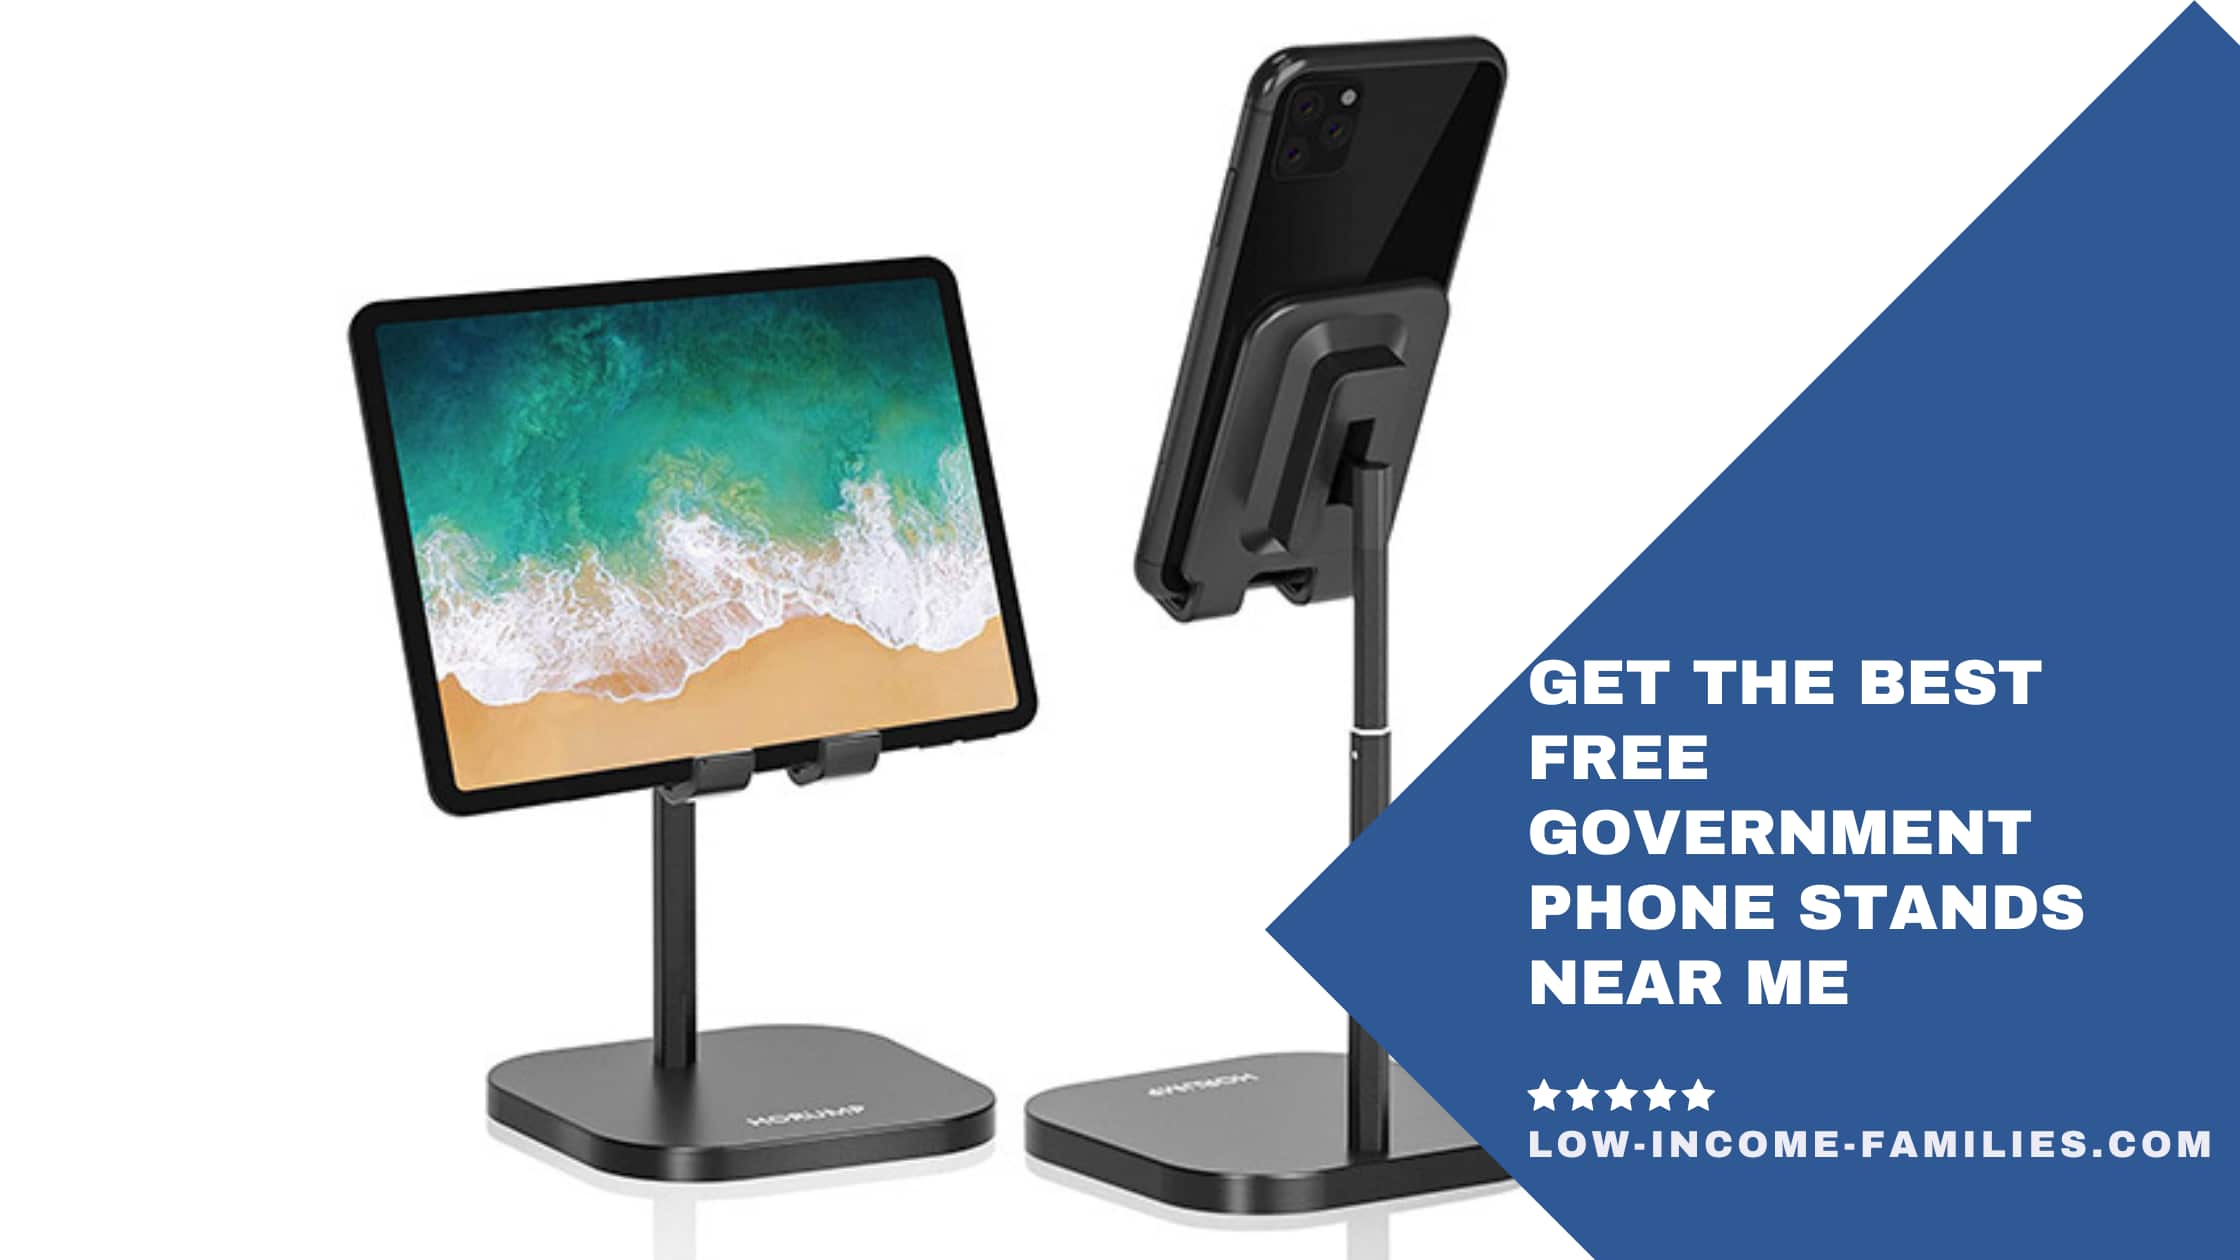 Get the Best Free Government Phone Stands Near Me